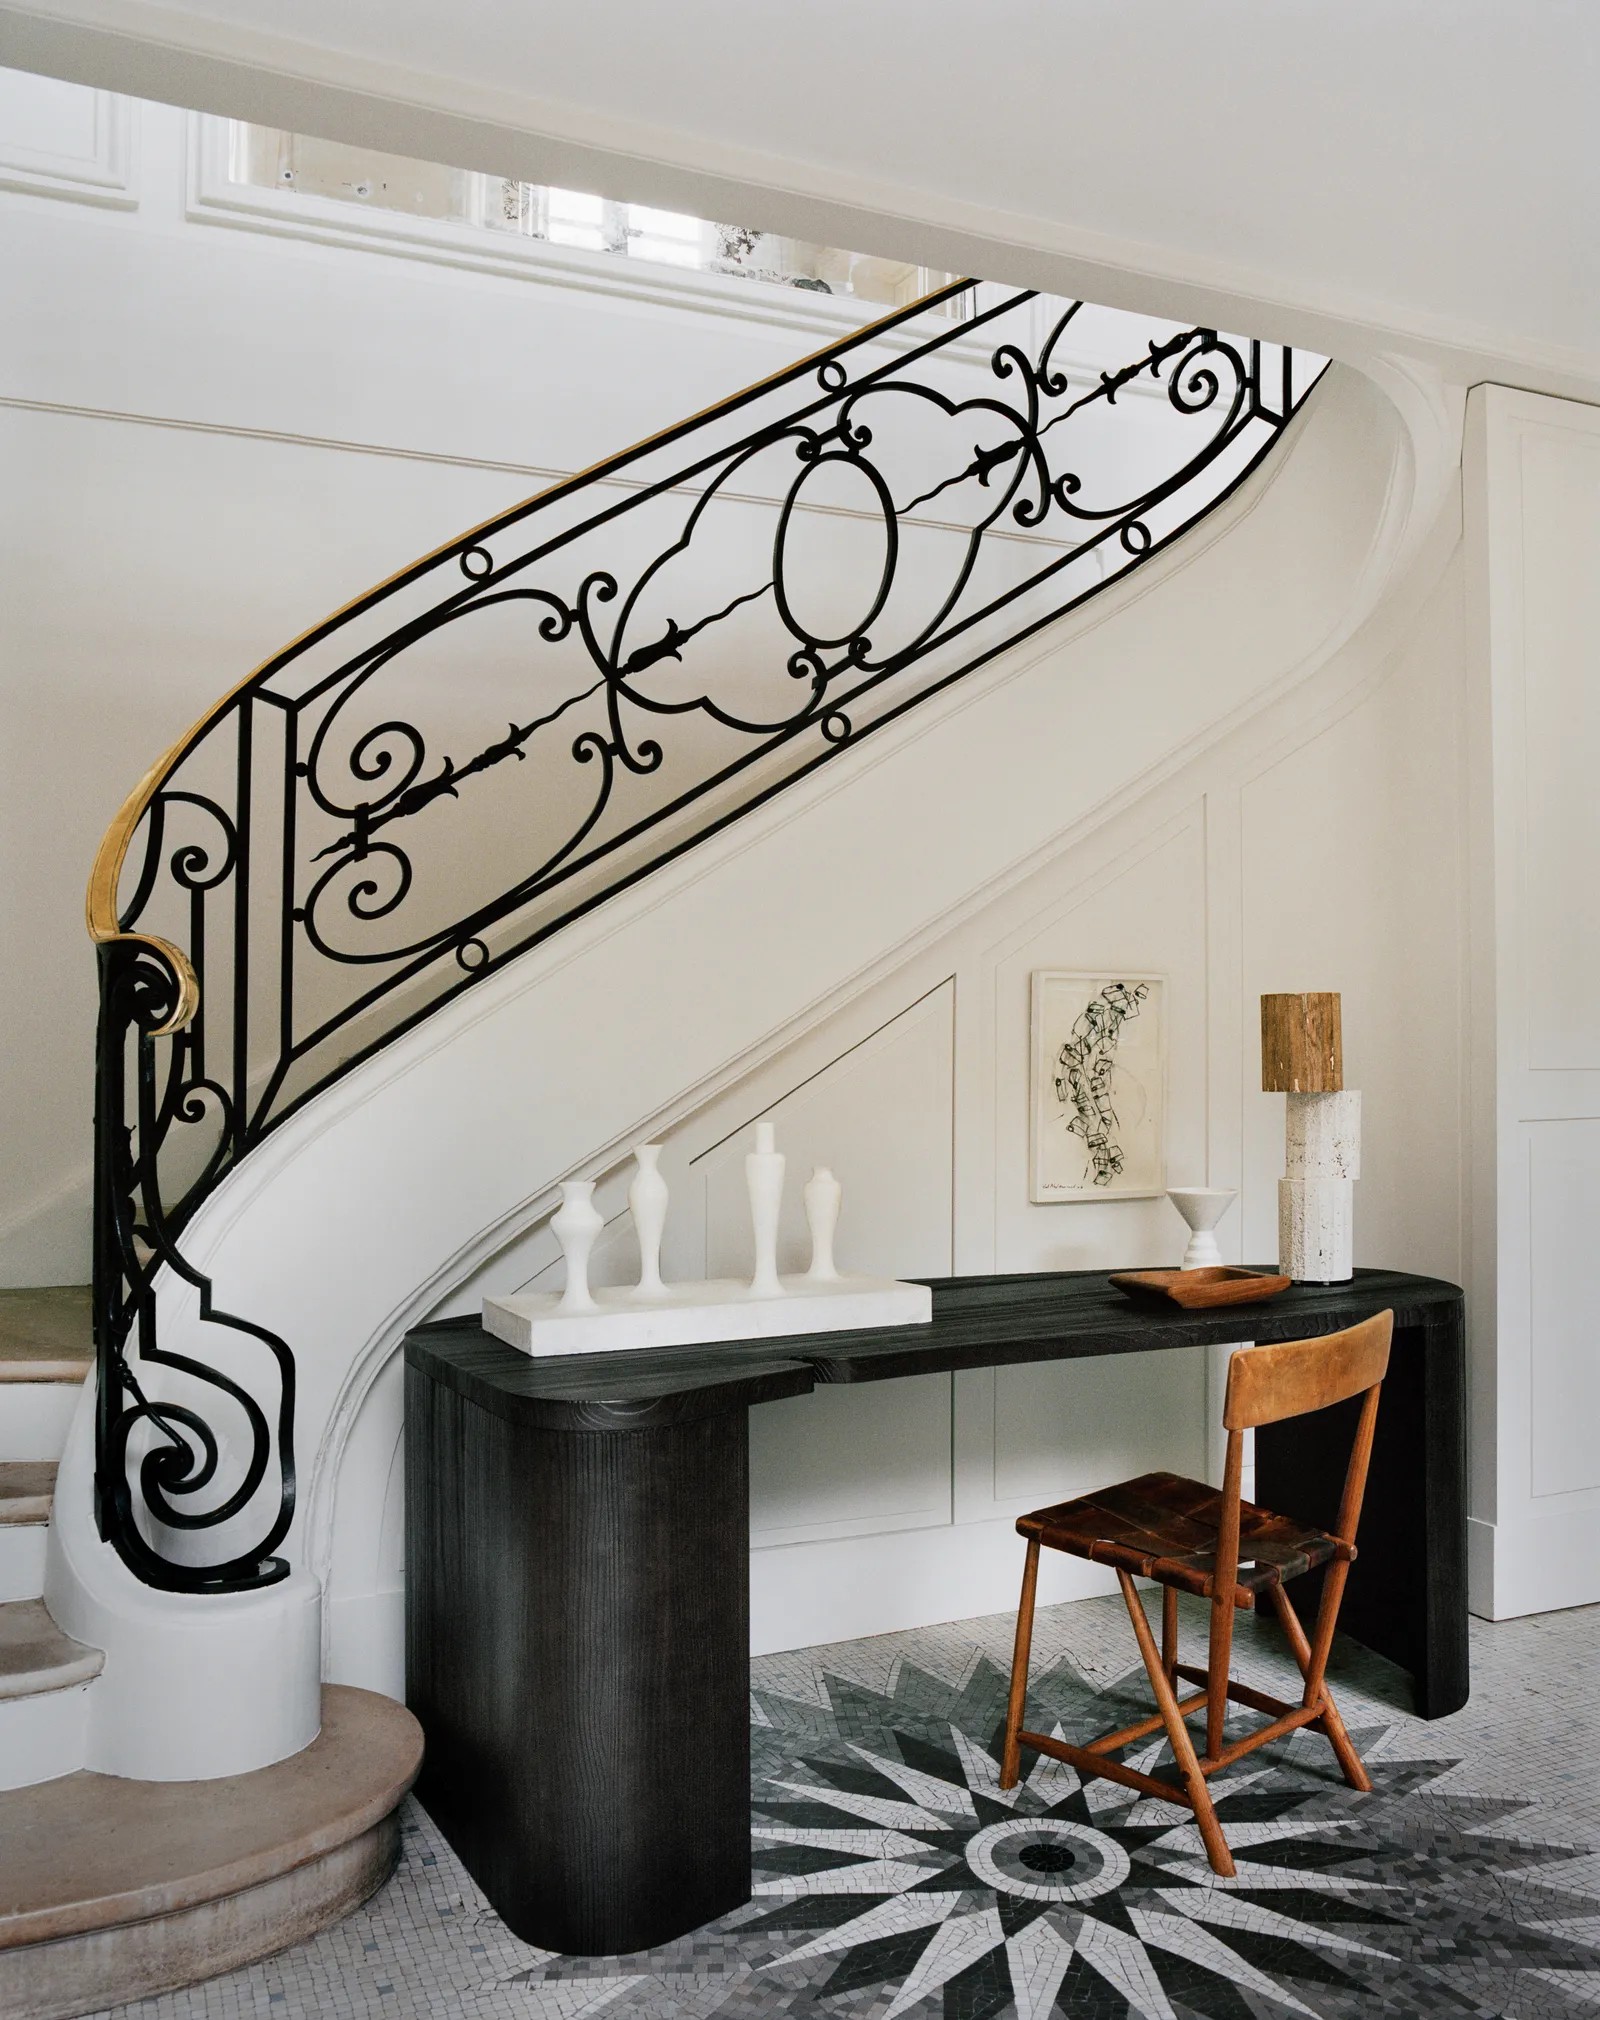 Entry with a big curved staircase with a crafted railing